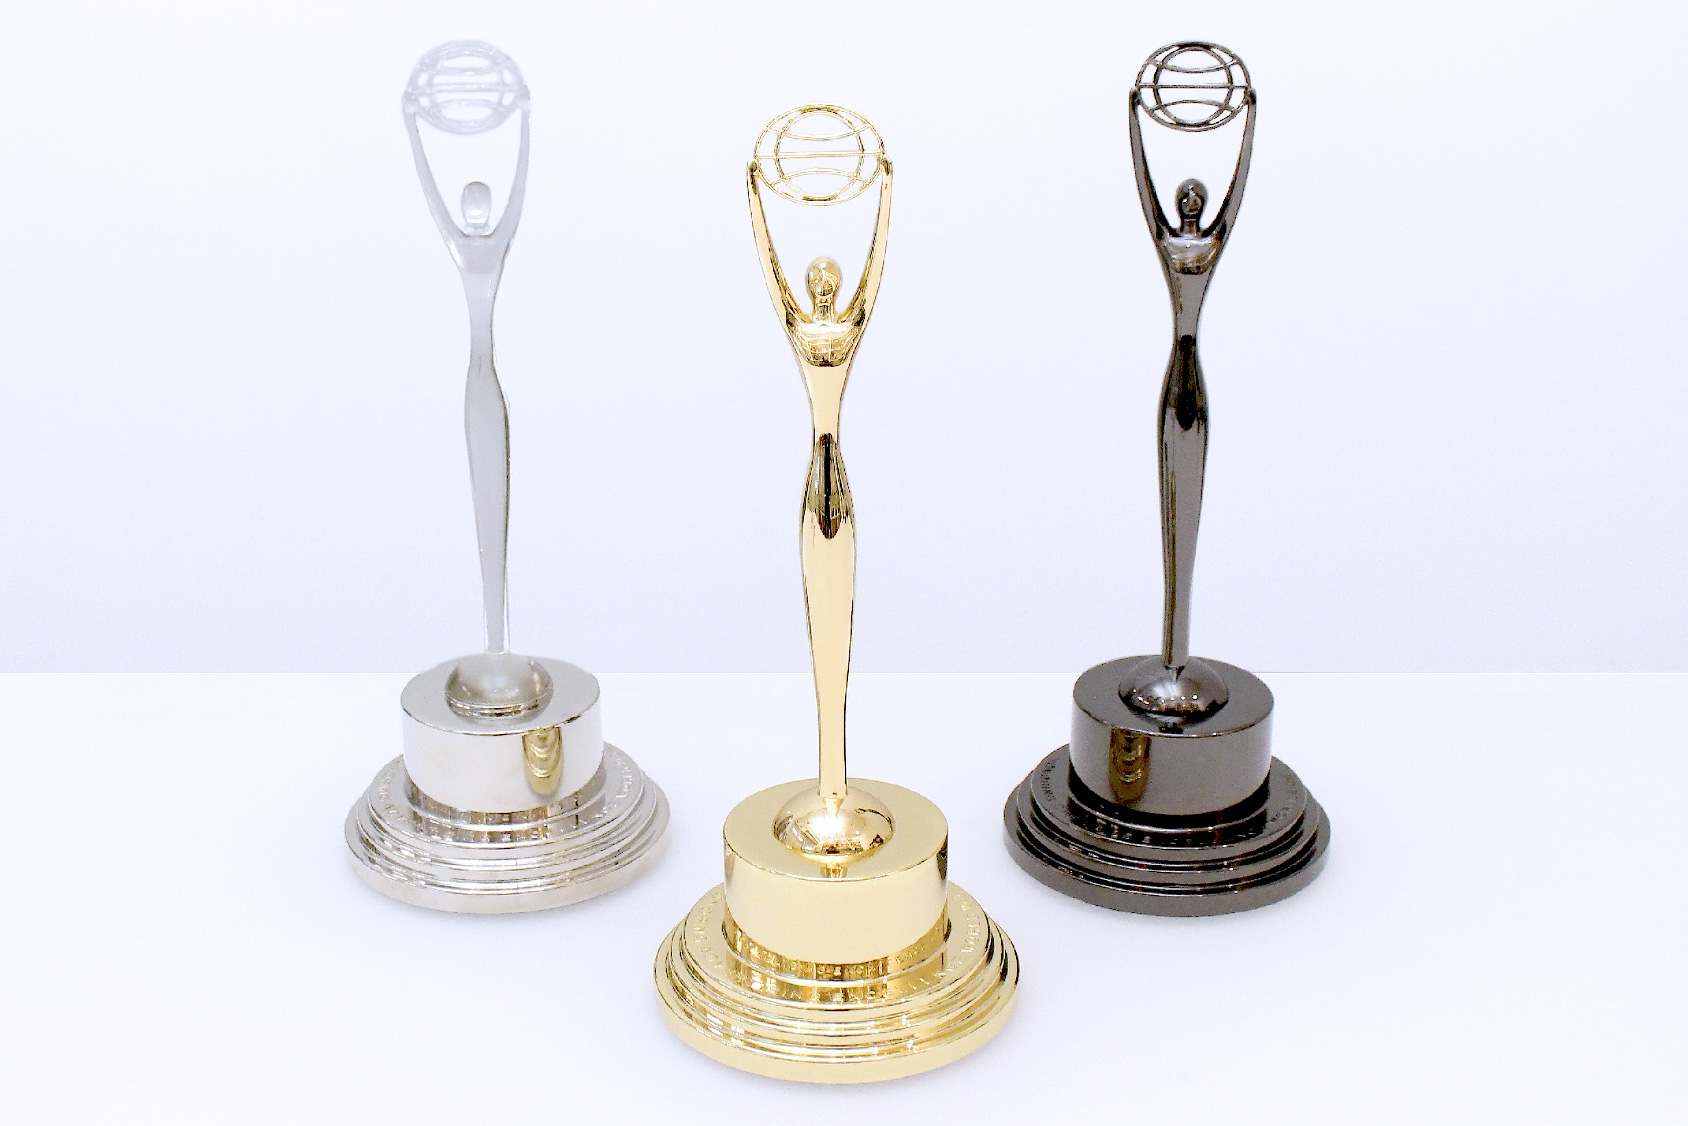 Three Clio trophies in crystal, gold and black displayed on a white table at Society Awards NYC headquarters